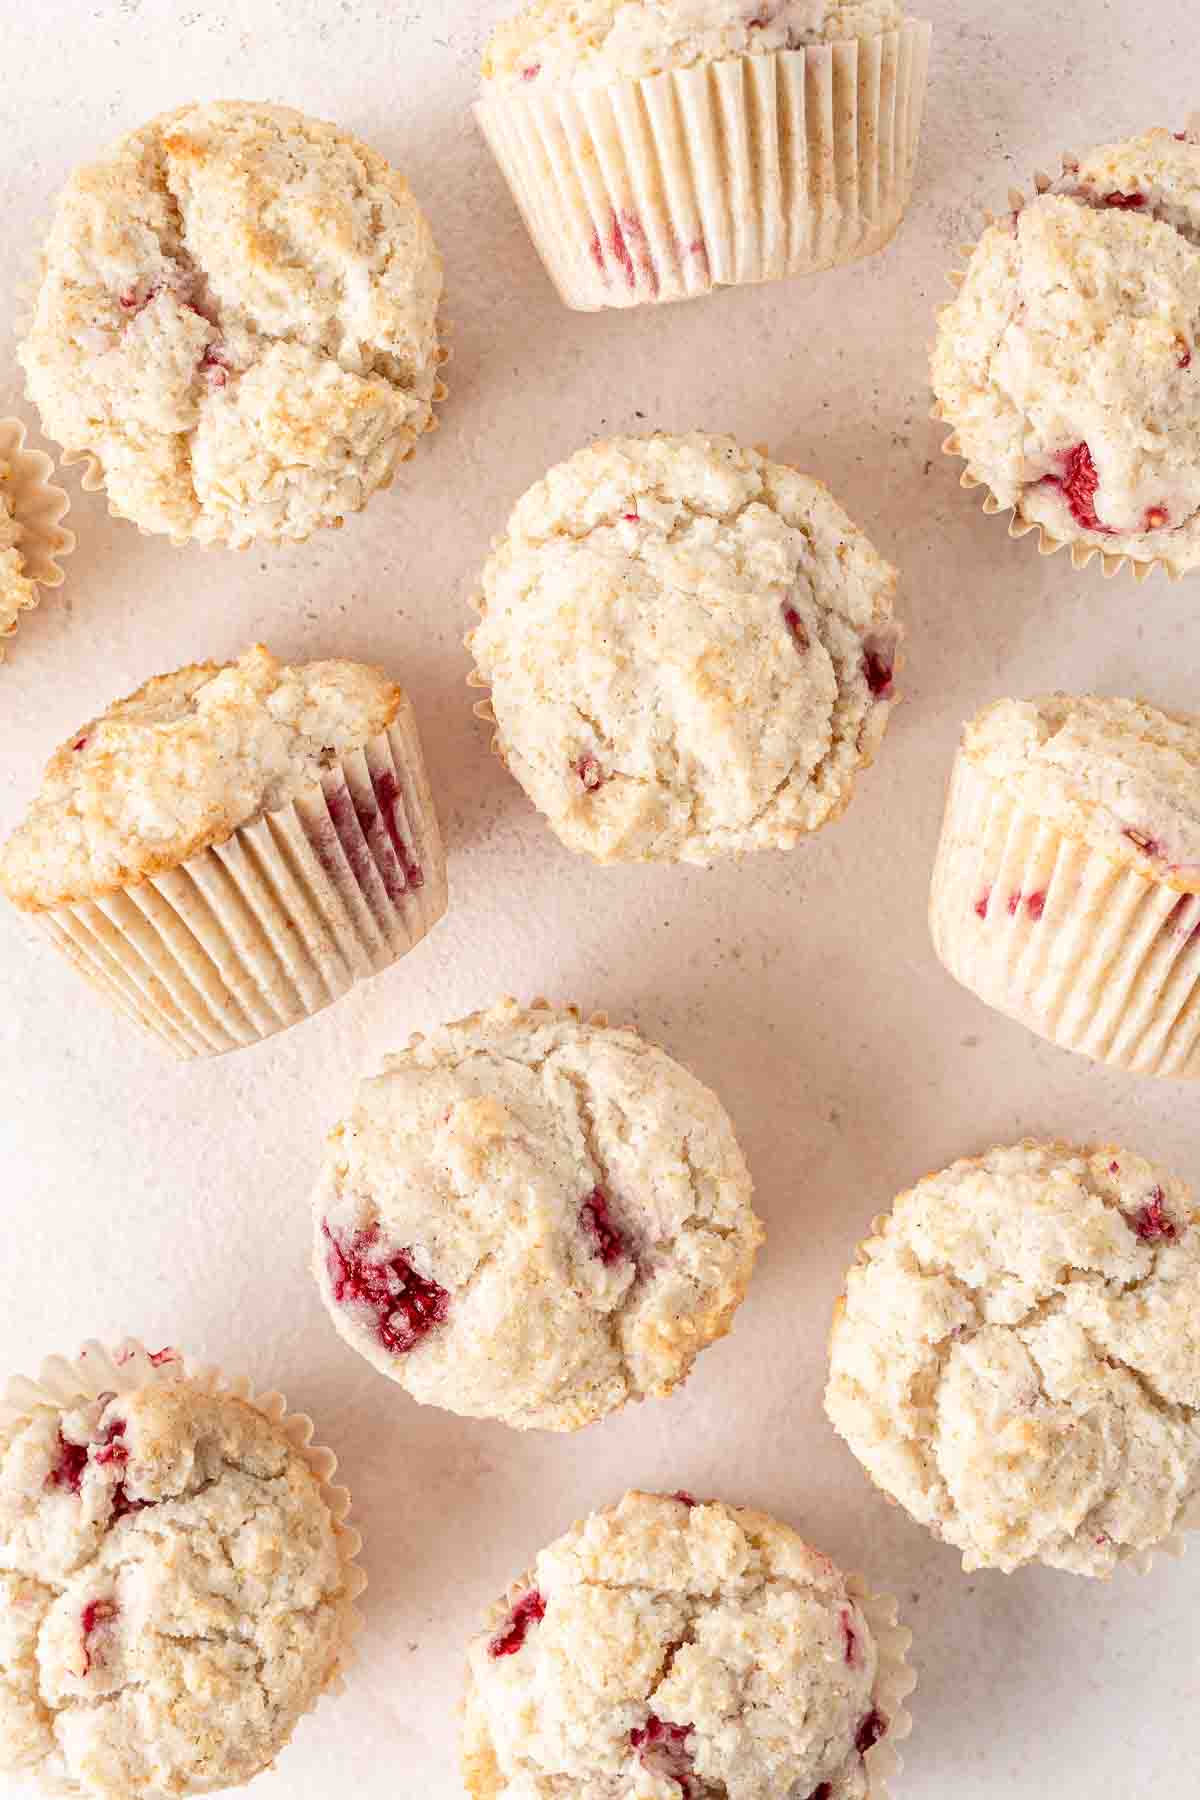 Gluten free raspberry muffins laid out.